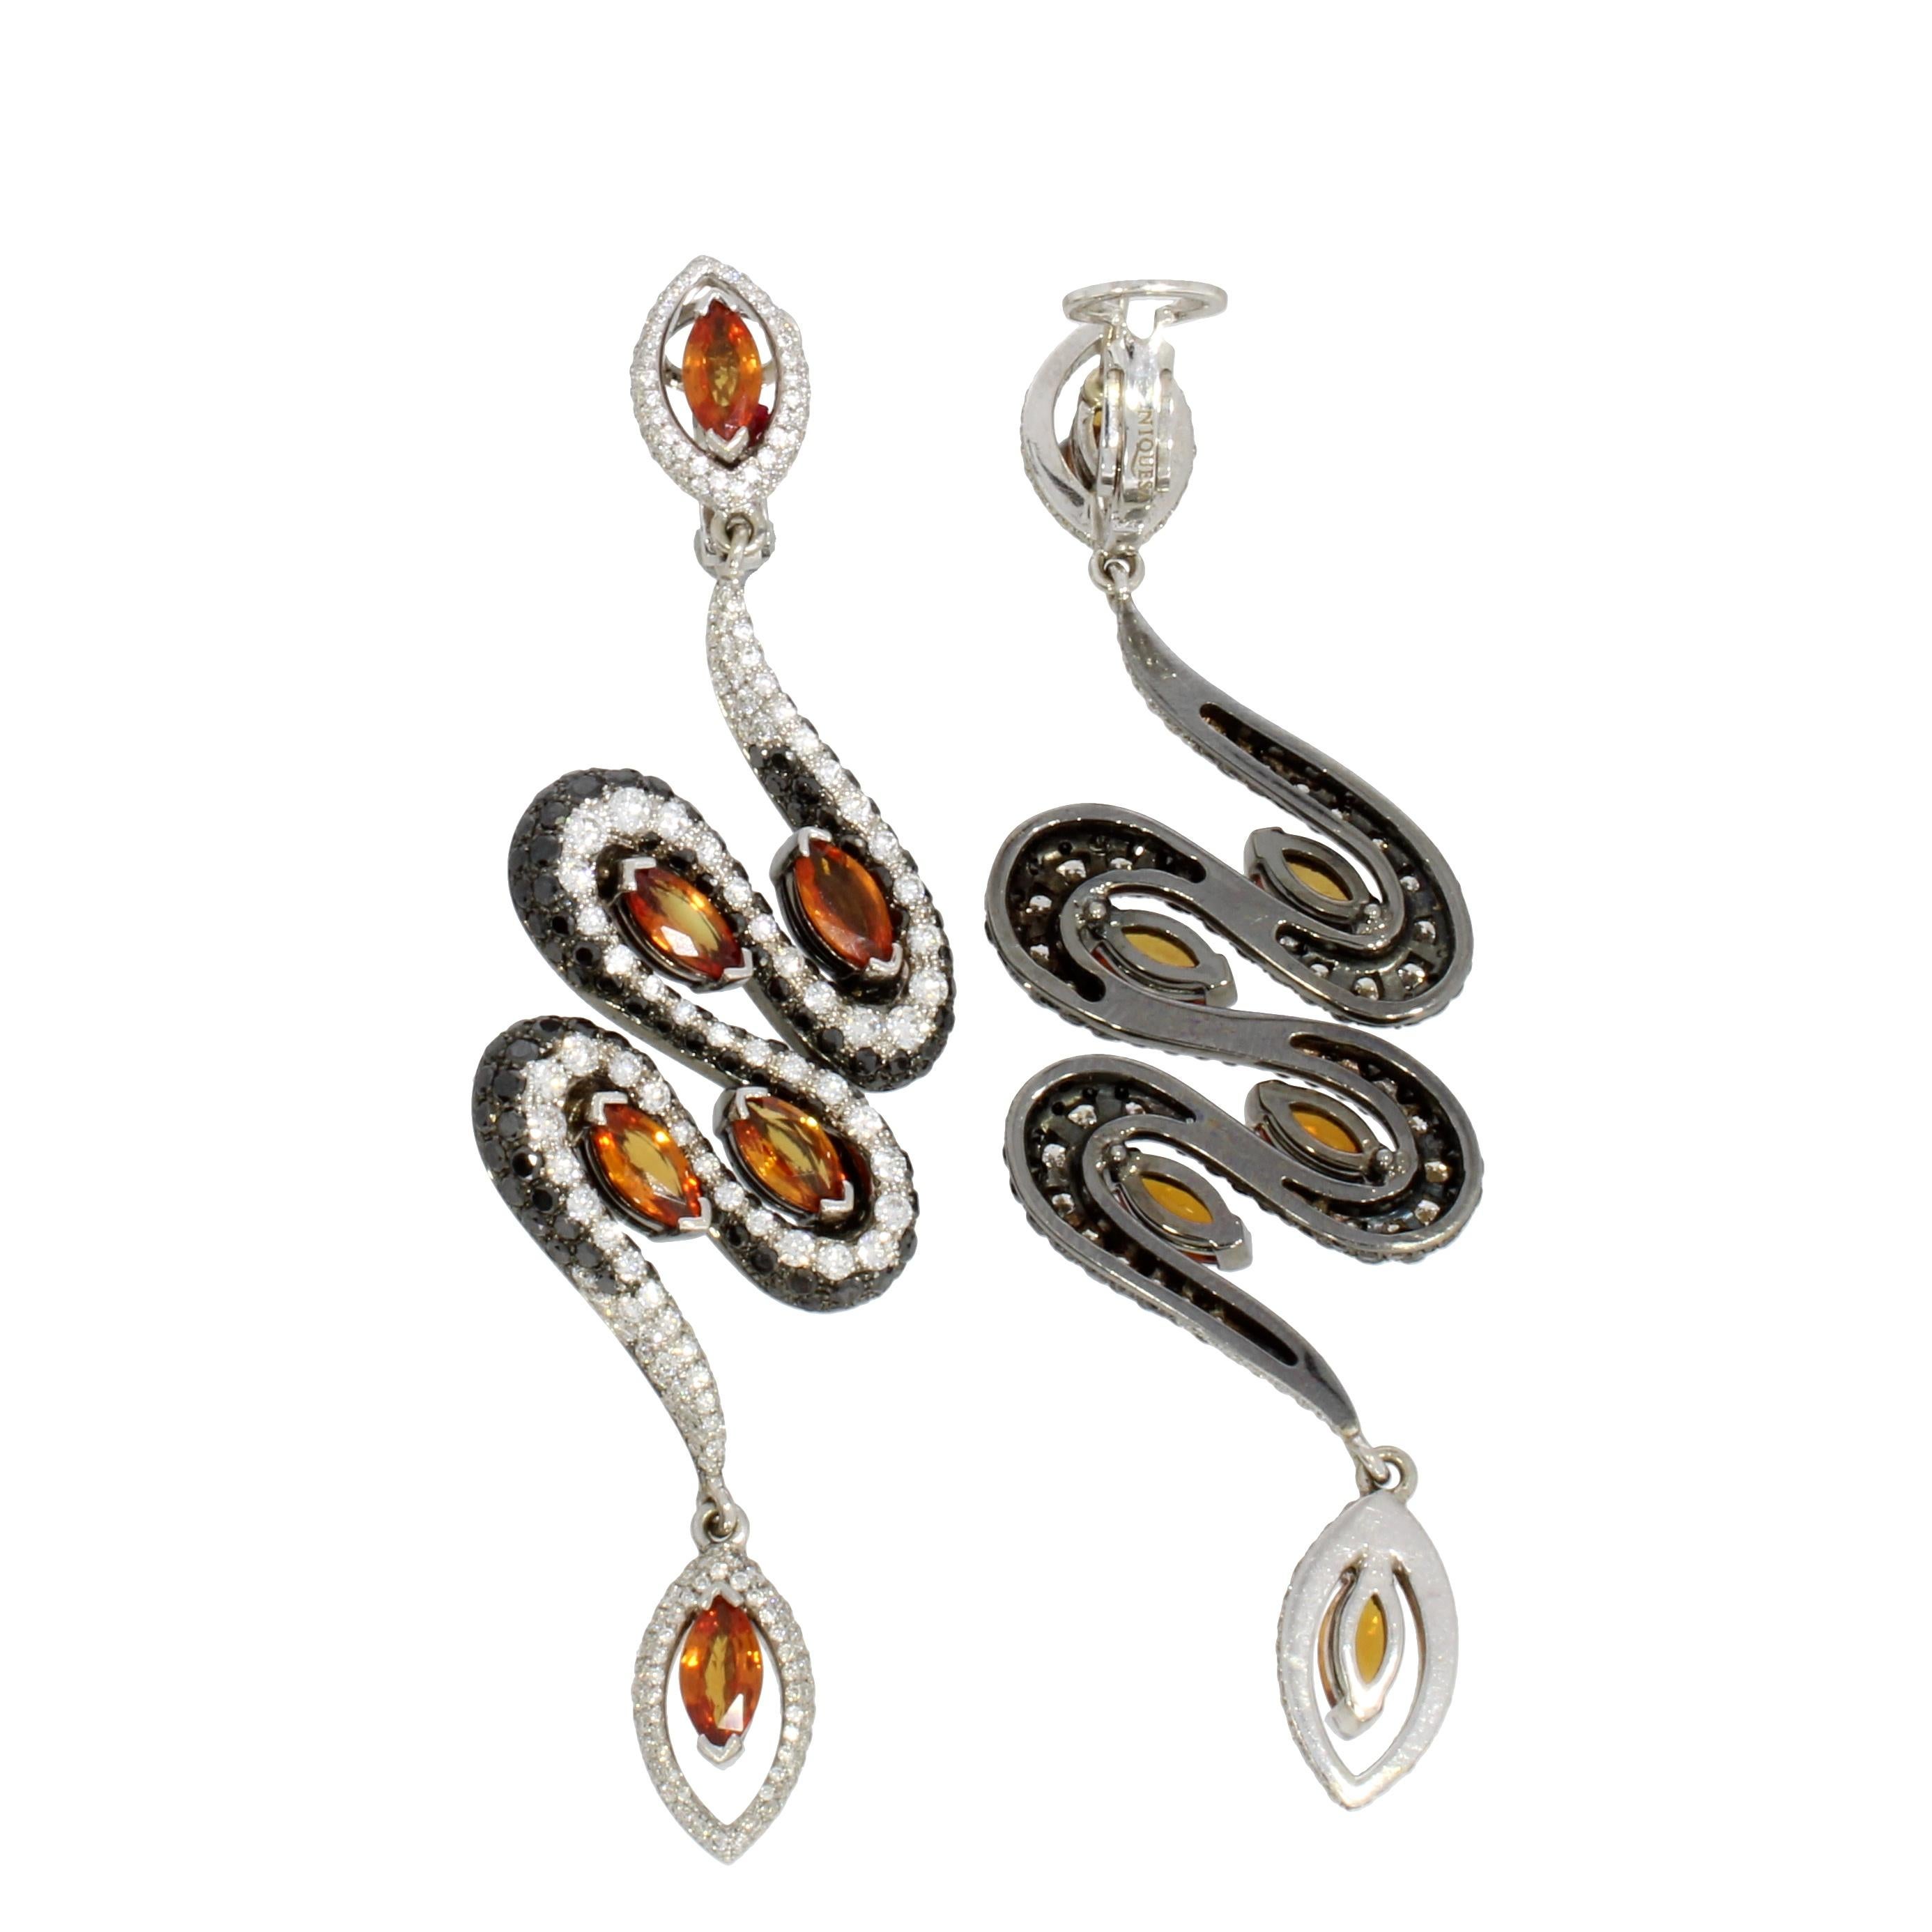 Marquise Cut 18 Karat White Gold Orange Sapphire and Diamond Signature Earrings by Niquesa For Sale